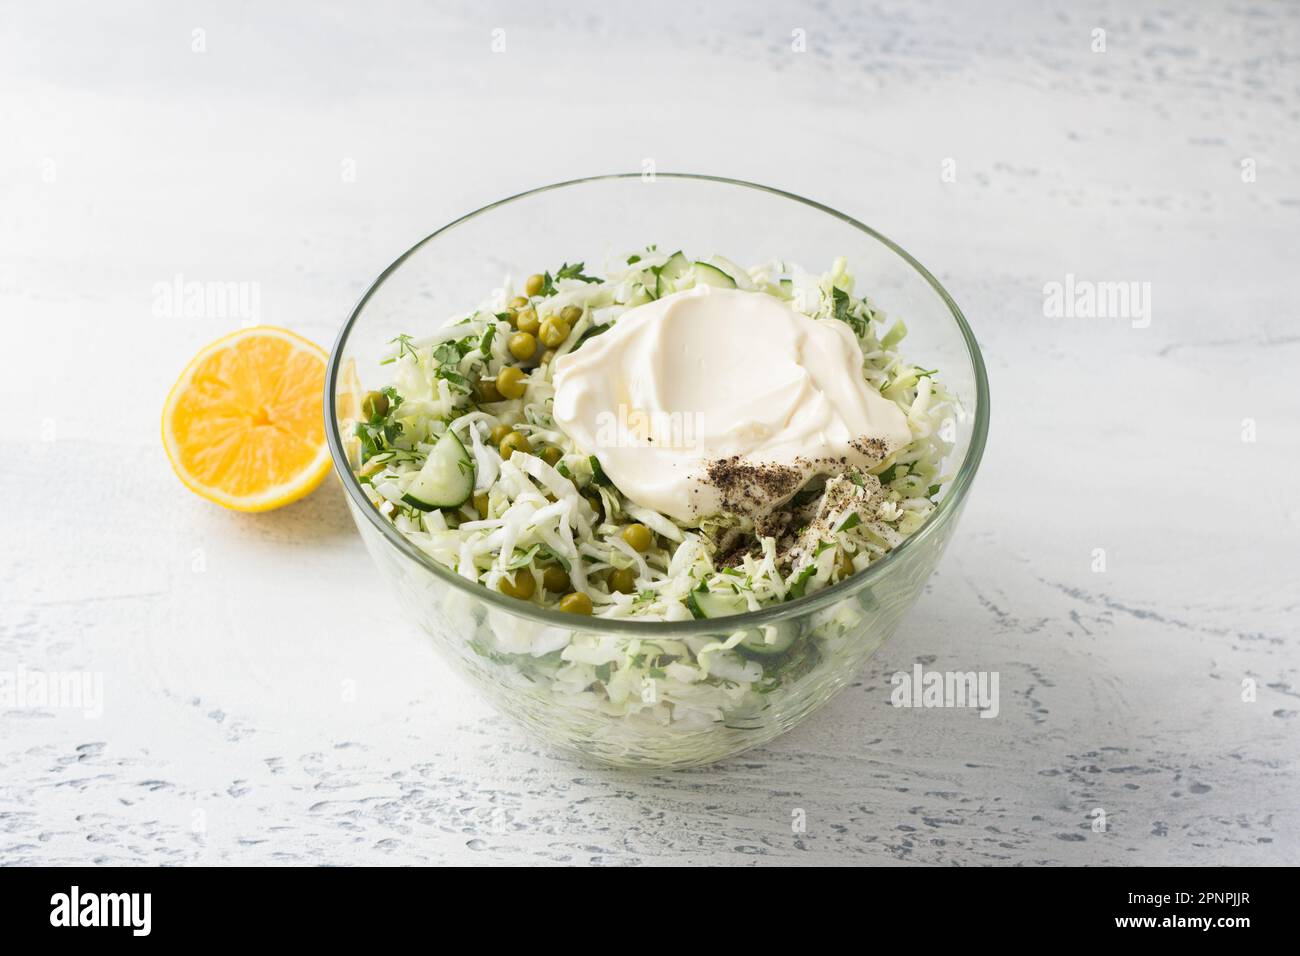 Glass bowl of cabbage salad with cucumbers, green peas, chopped herbs, mayonnaise dressing and lemon. Cooking delicious homemade salad. Step-by-step i Stock Photo